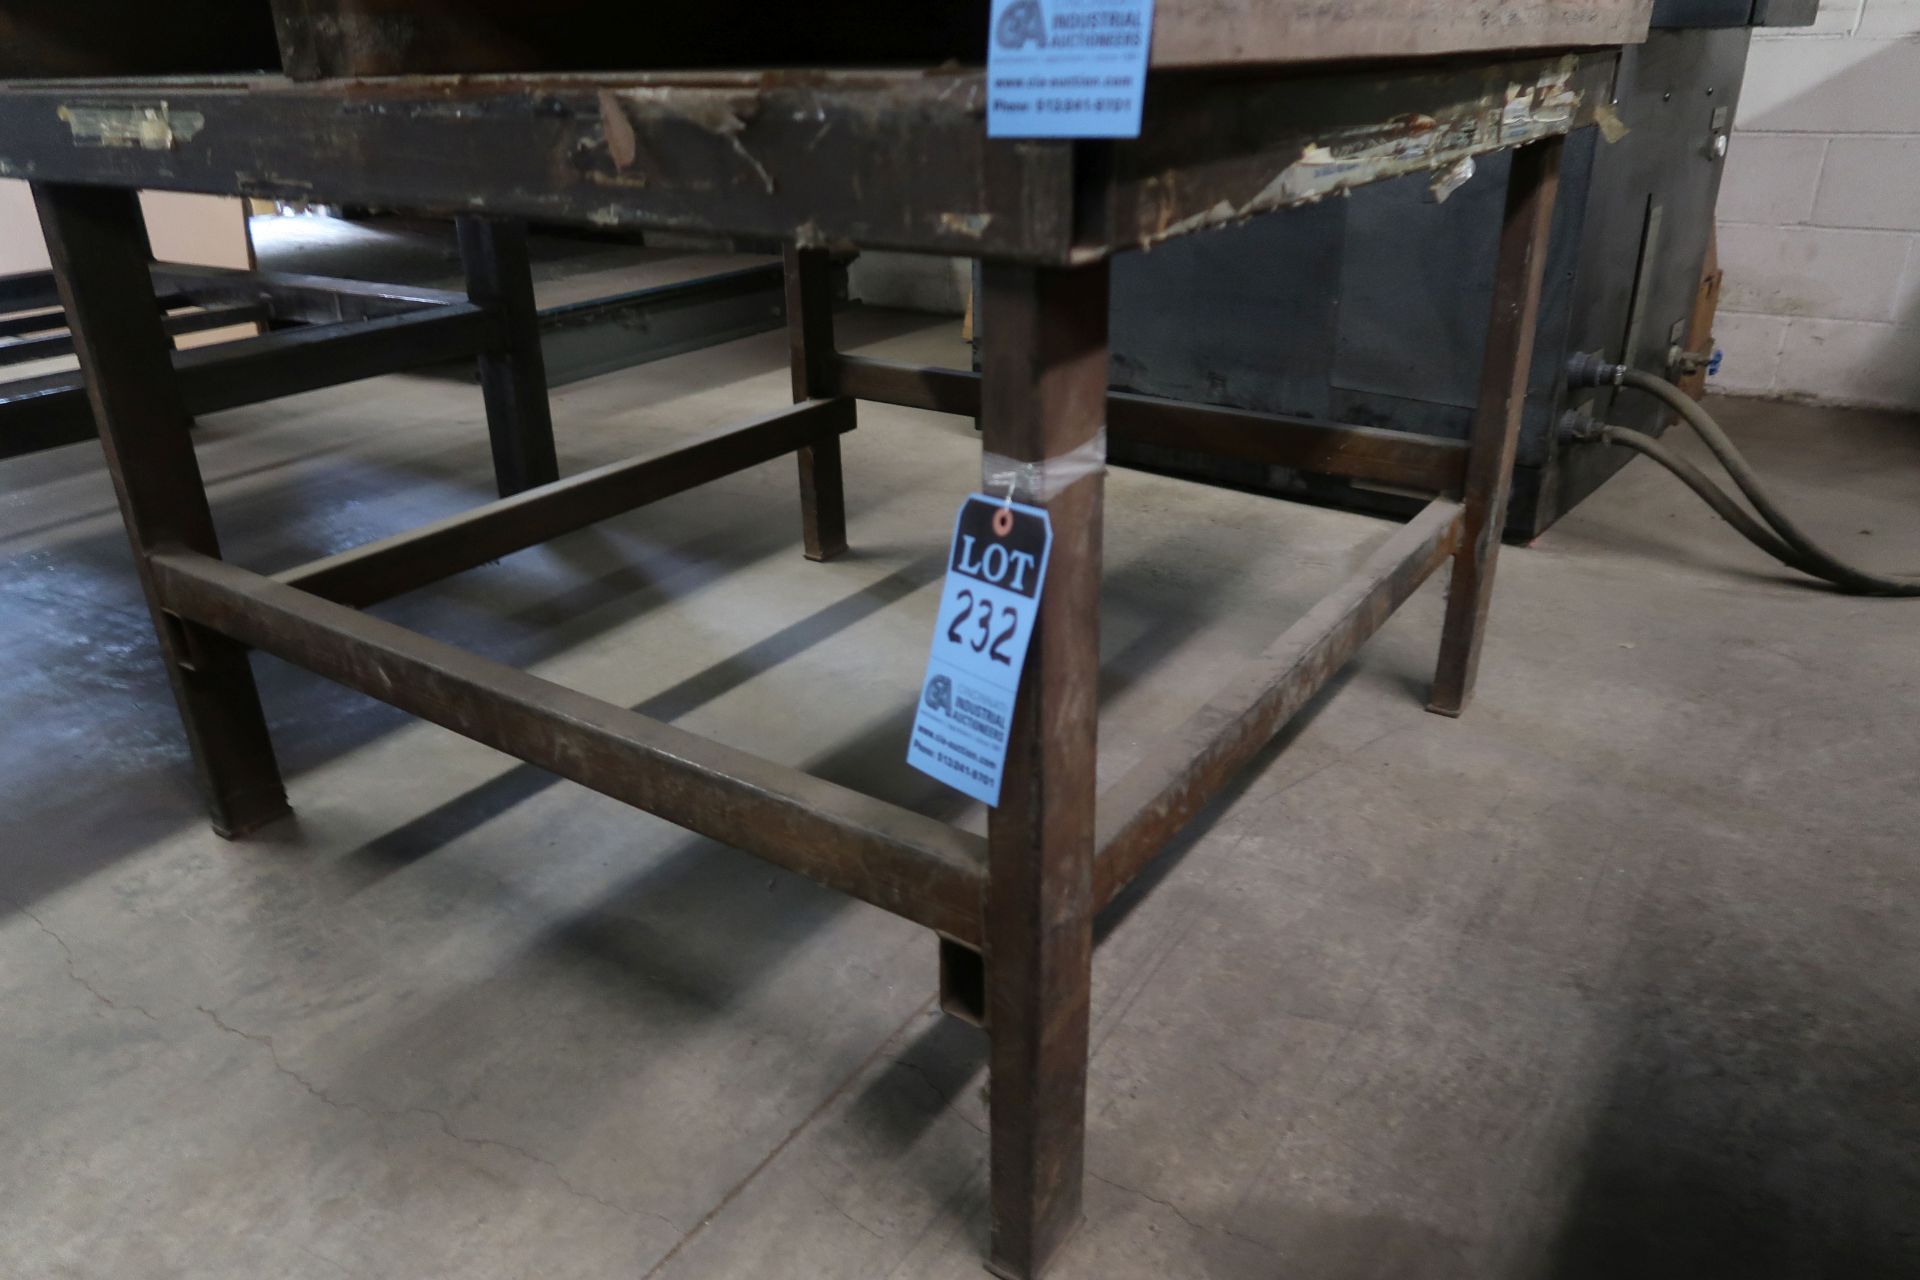 48" X 48" X 32" HIGH SHOP BUILT PORTABLE WELDED STEEL TABLE **NO CONTENTS** **DELAY REMOVAL - PICK